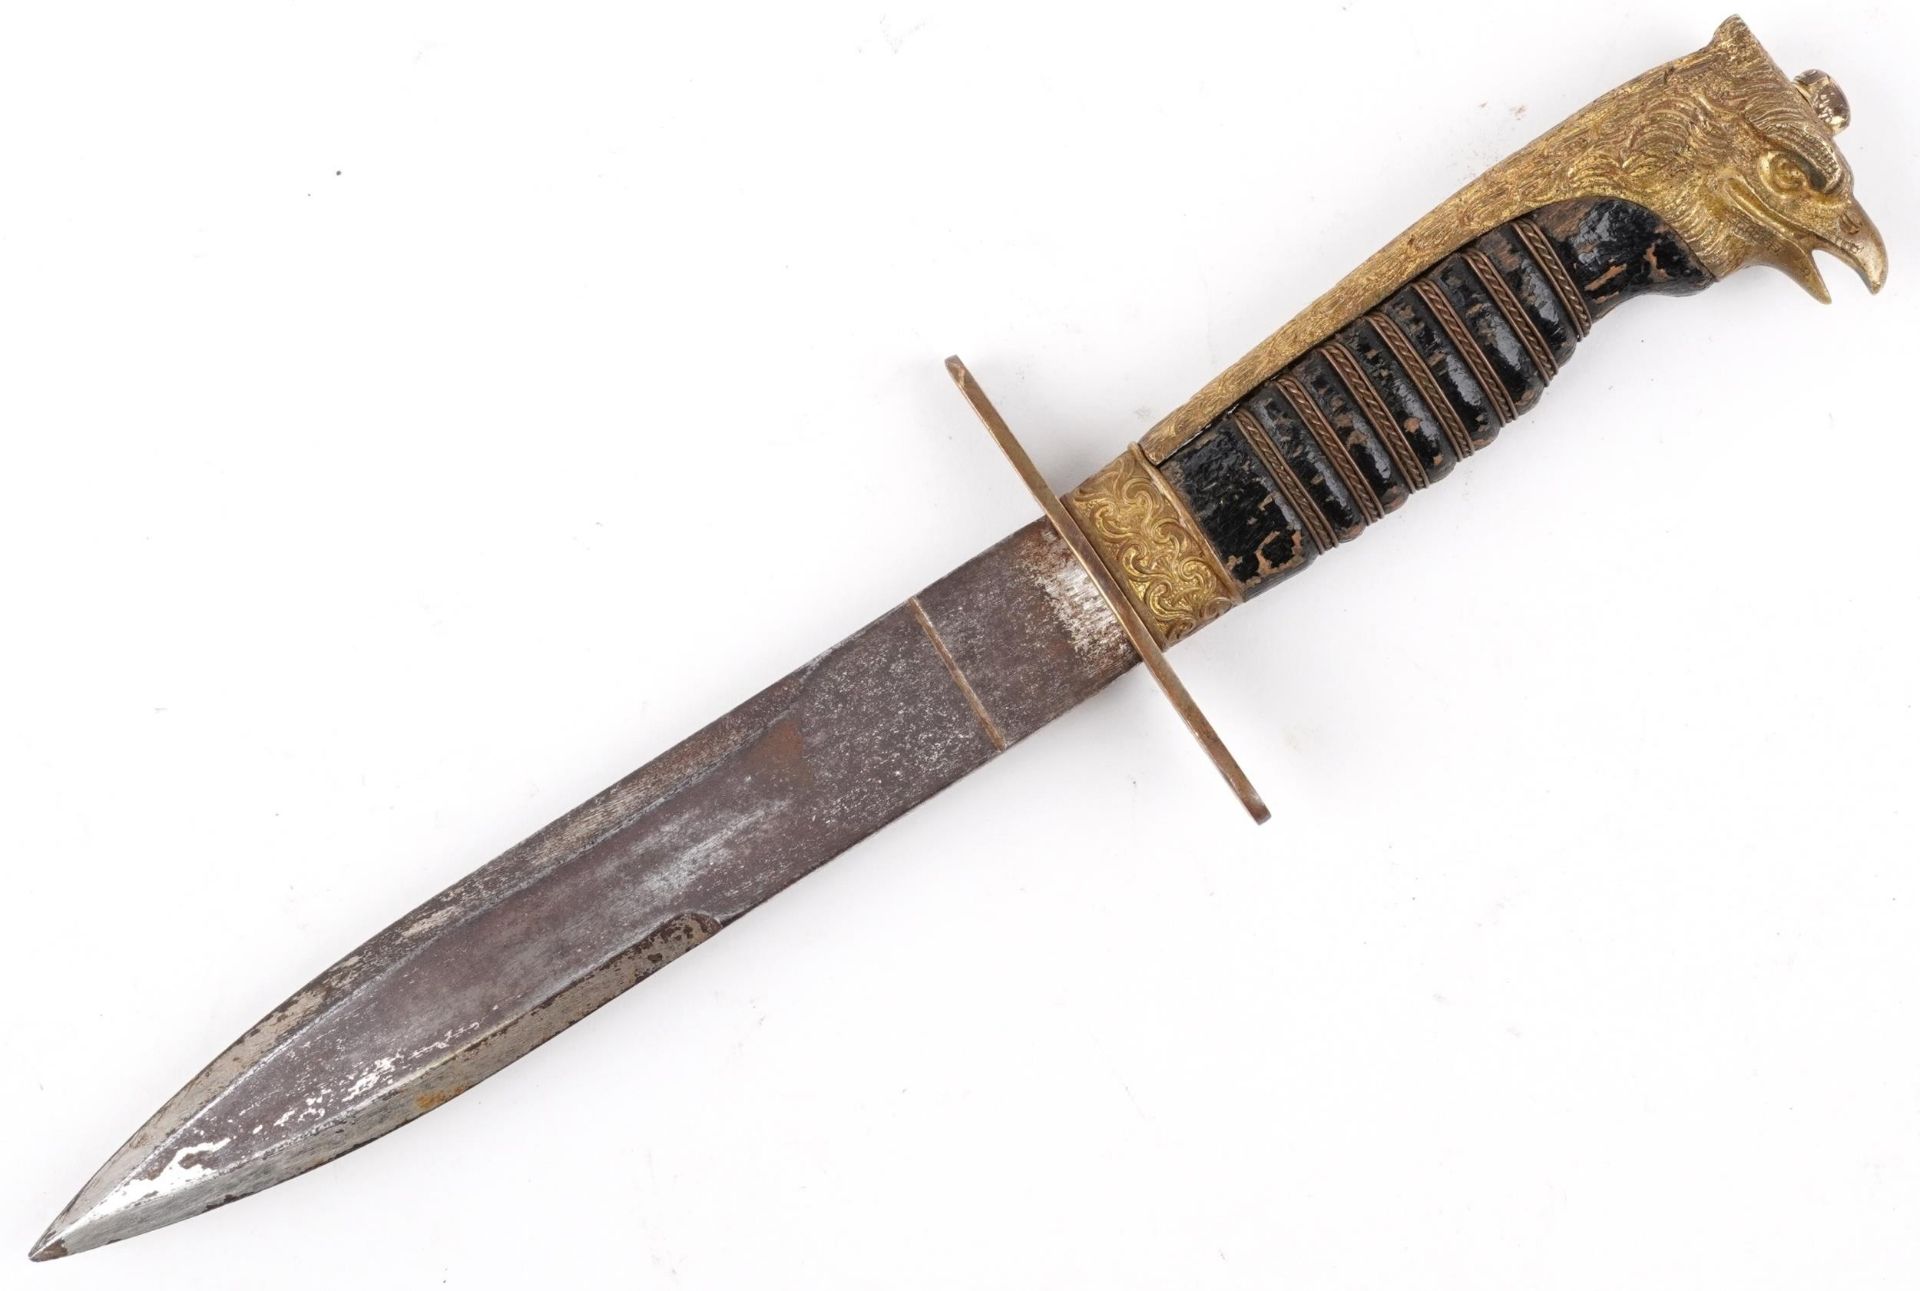 Italian Fascist military interest Youth Movement dress dagger with double edged steel blade, 28cm in